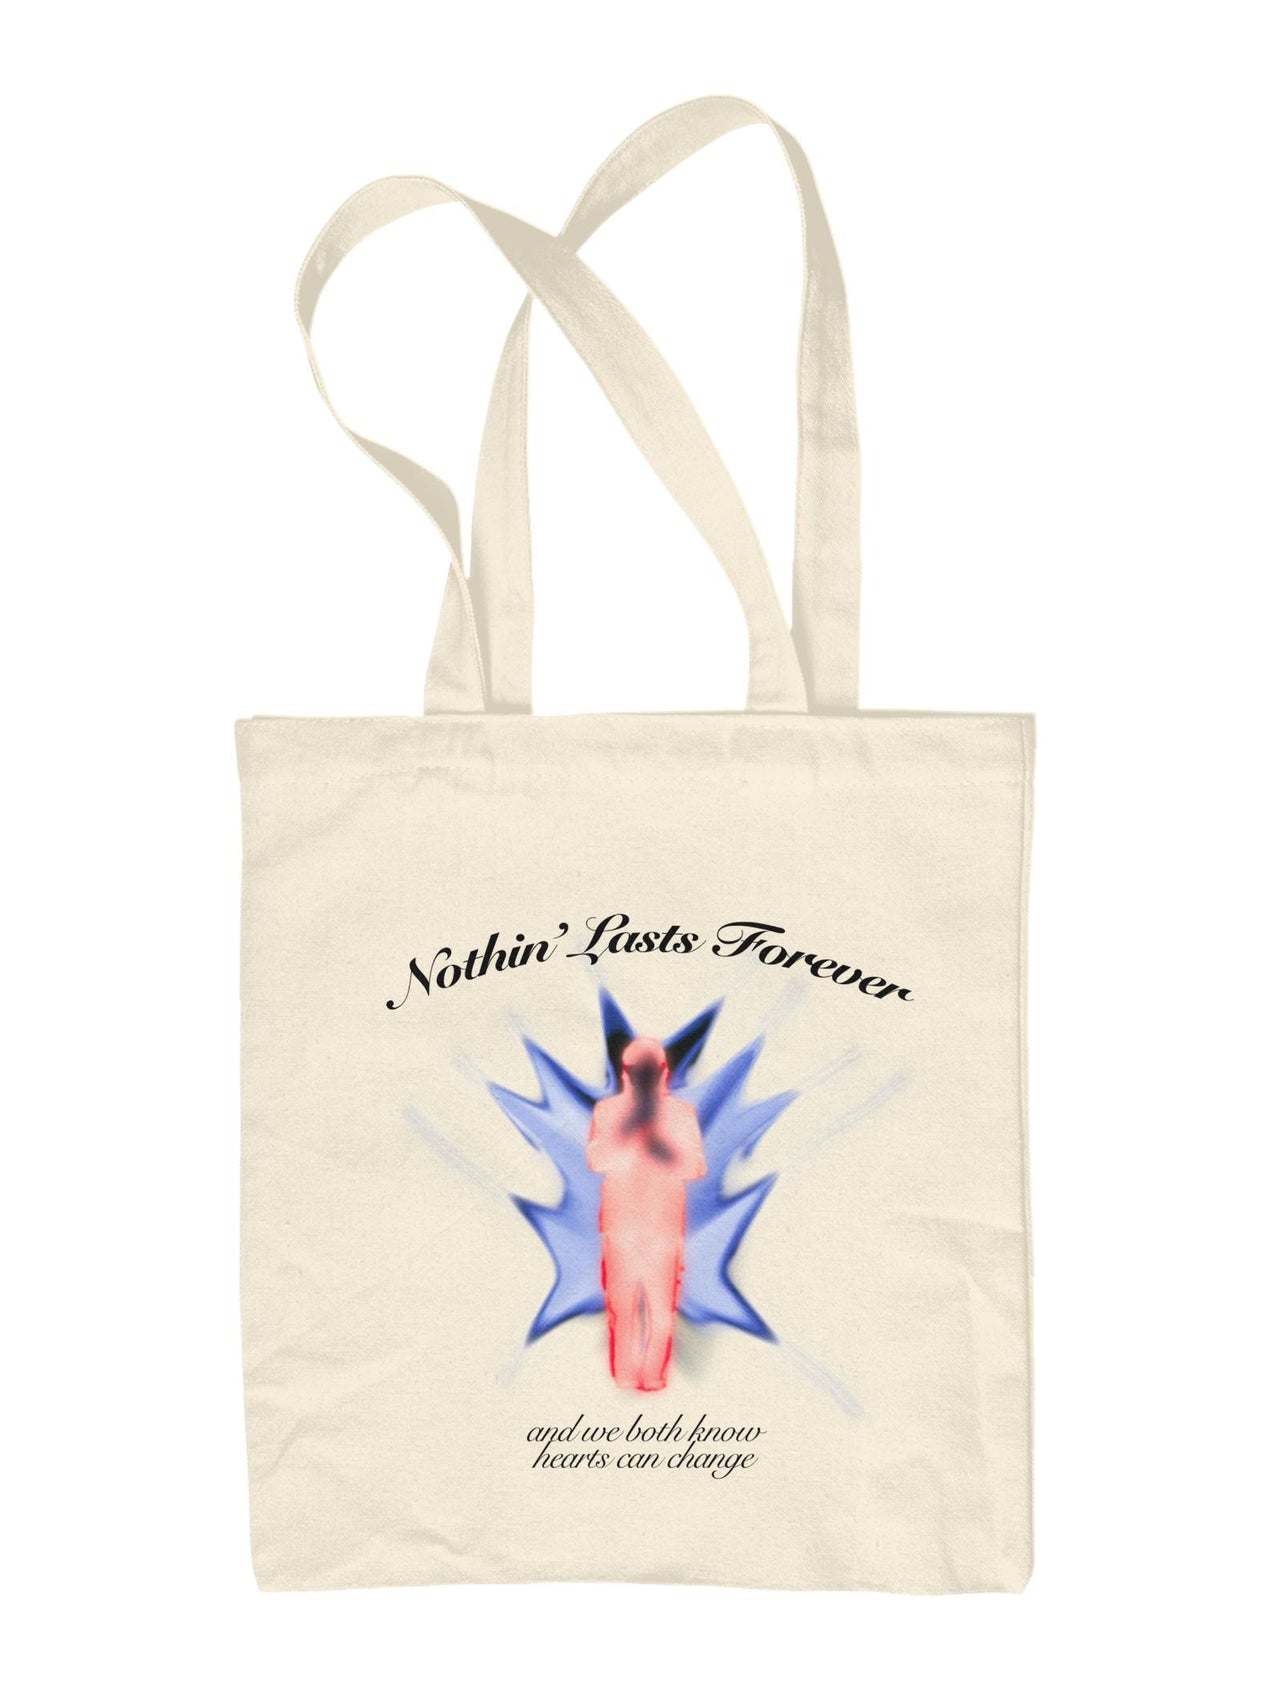 Nothin' Lasts Forever Tote Bag